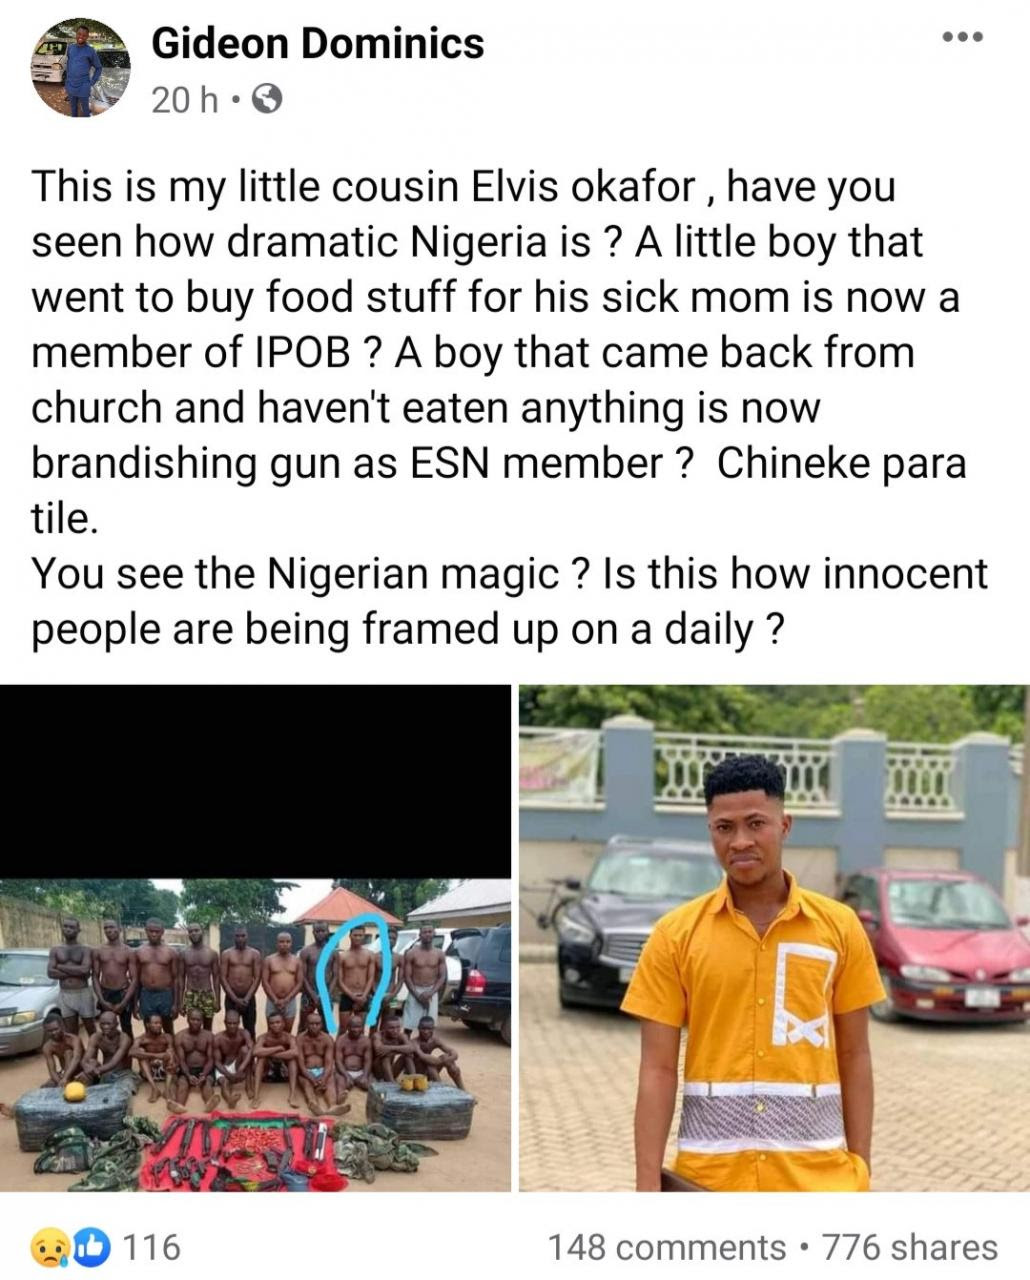 Man claims person paraded as IPOB member is his cousin who went to buy food for his sick mum after church